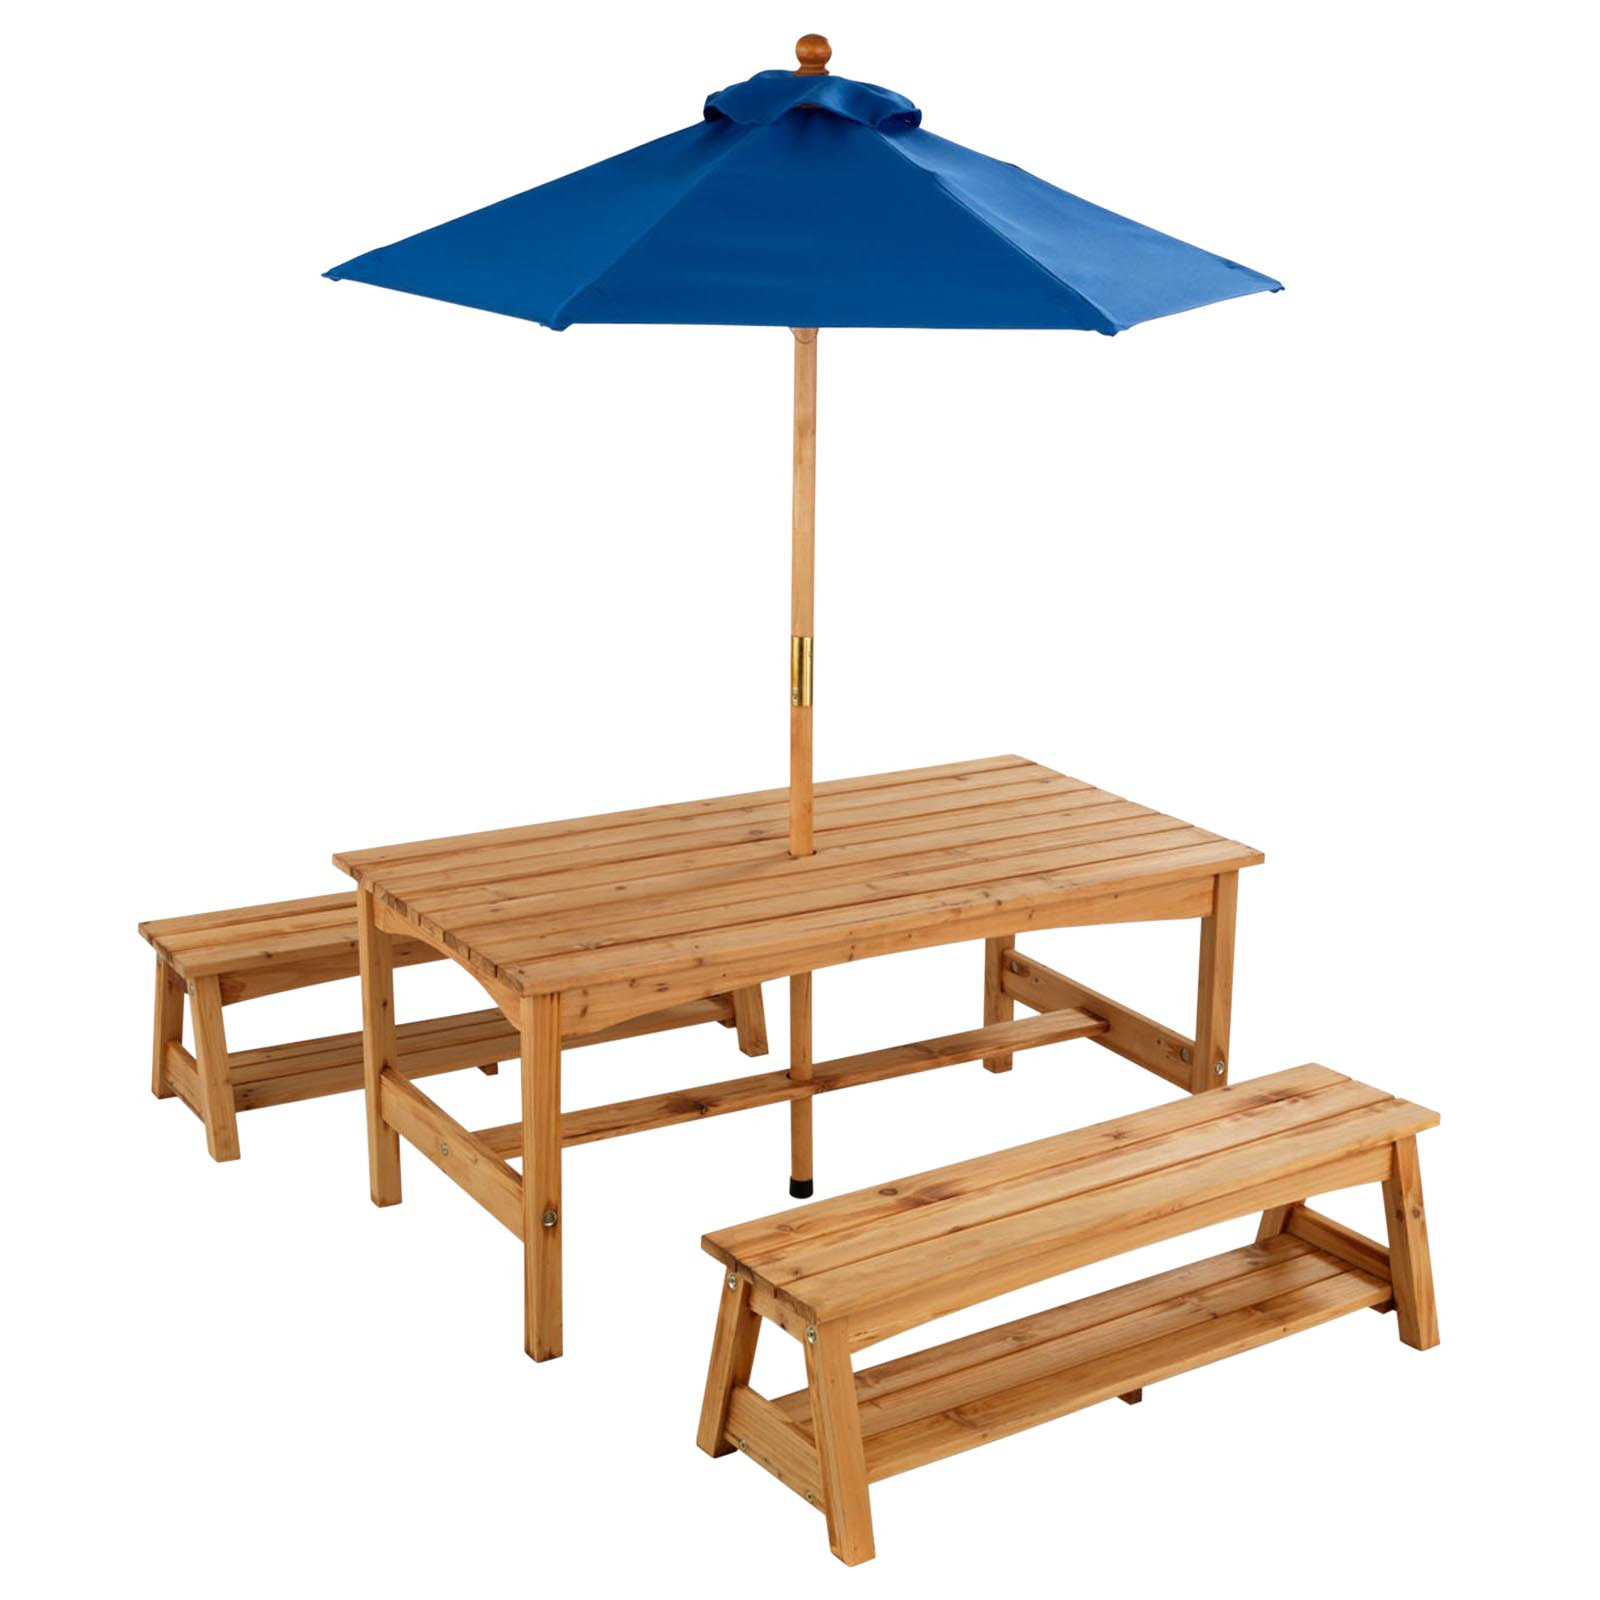 Kids Outdoor Table And Bench
 KidKraft Outdoor Table and Benches with Blue Umbrella